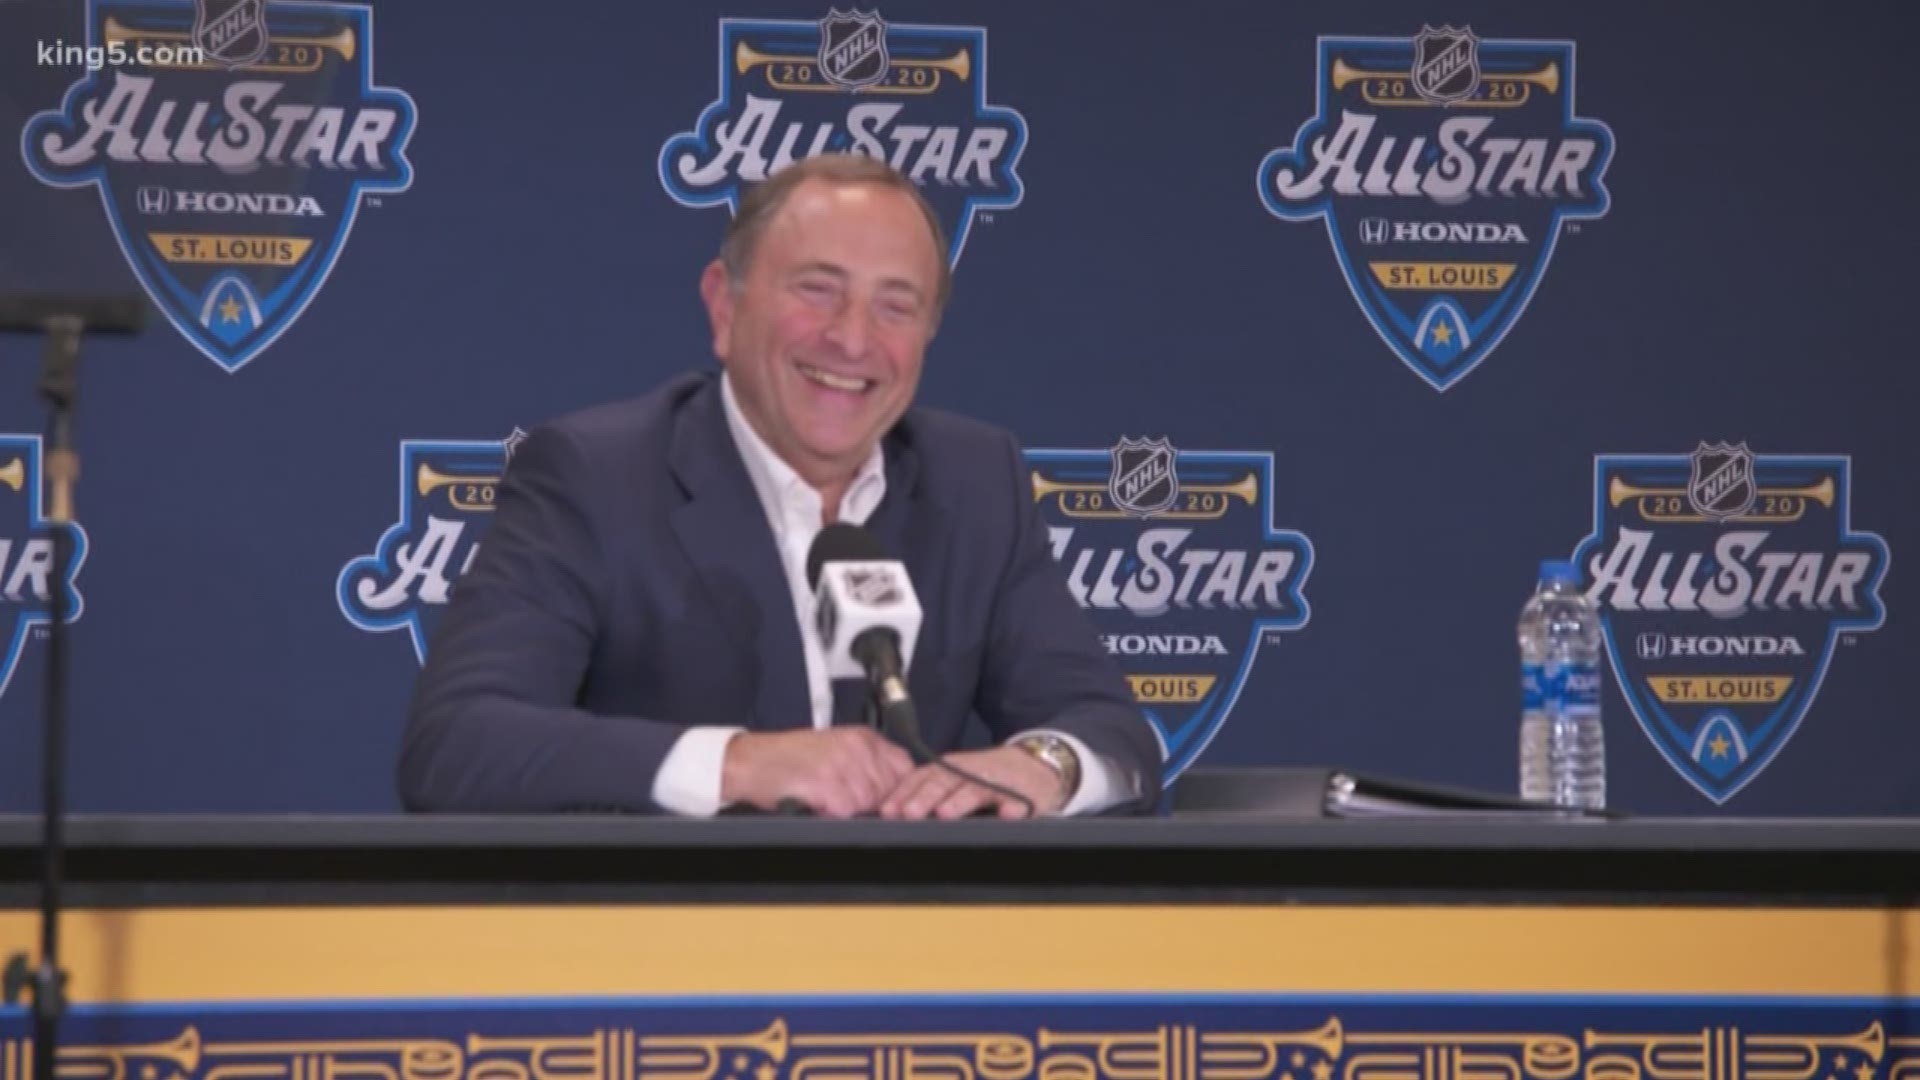 KING 5's Chris Daniels is at NHL All-Star Weekend and talked to Commissioner Gary Bettman. The big question: When will Seattle's team have a name?